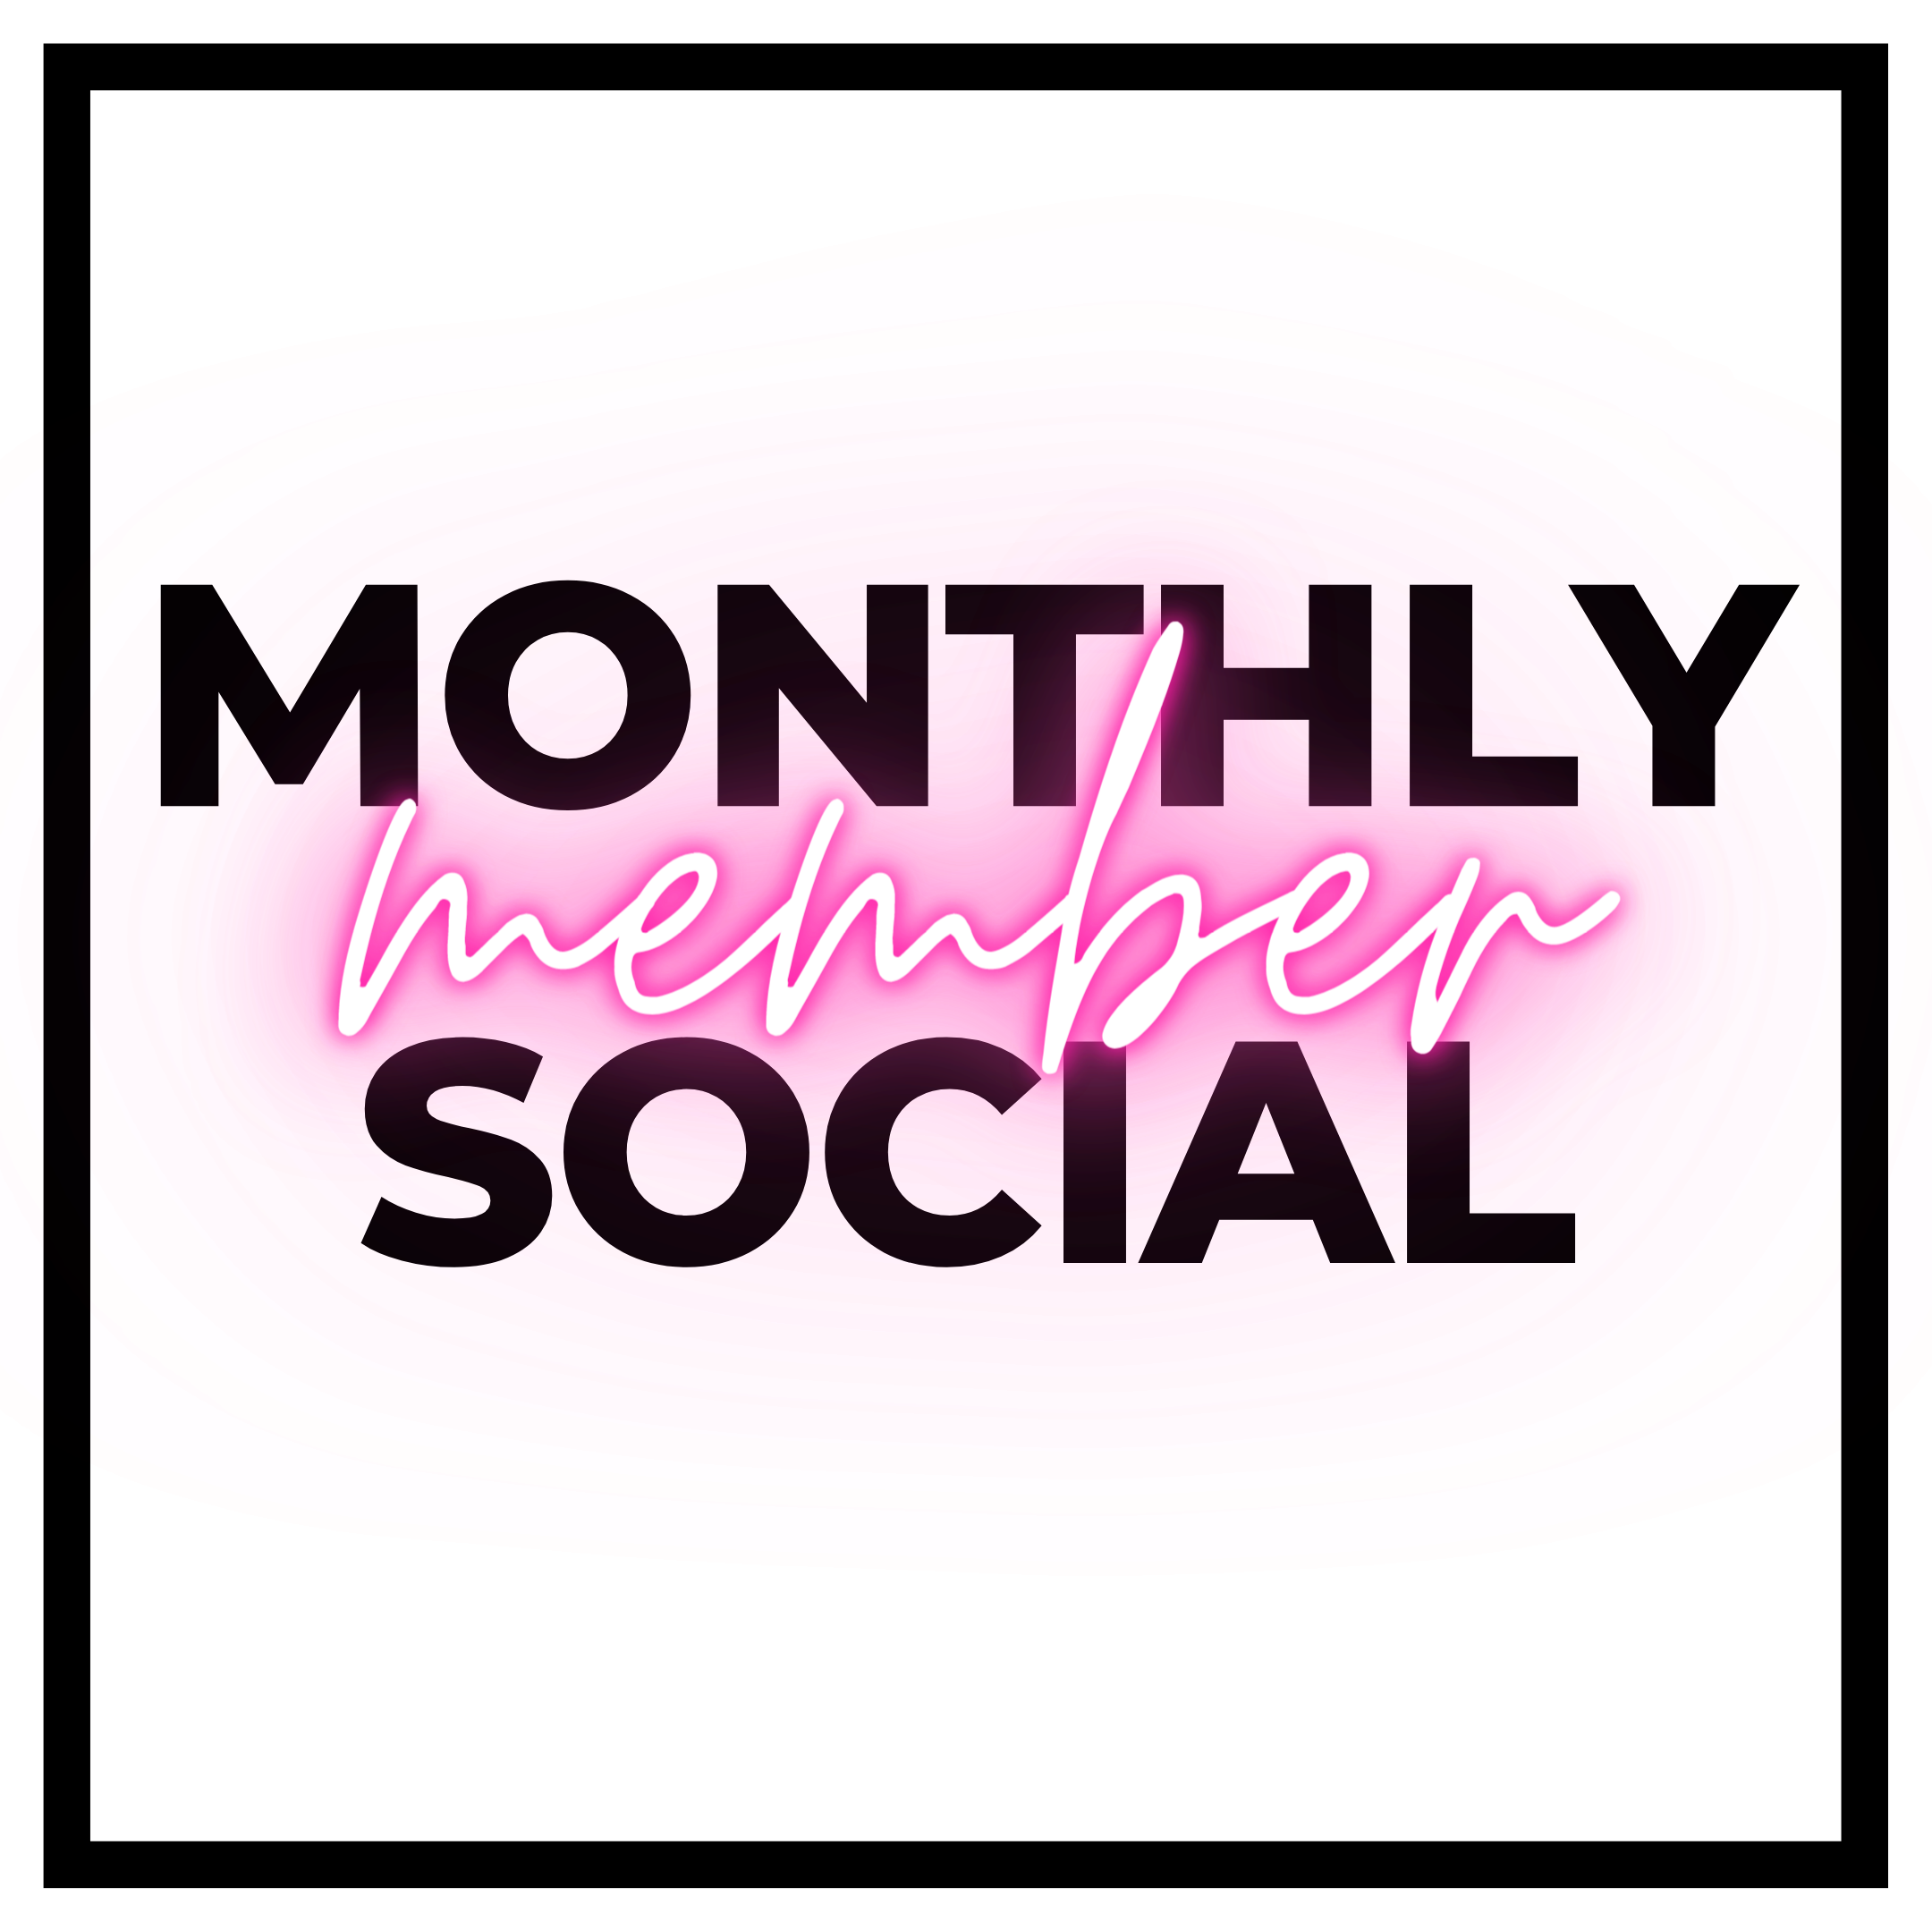 Monthly Member Social - Graphics copy.png